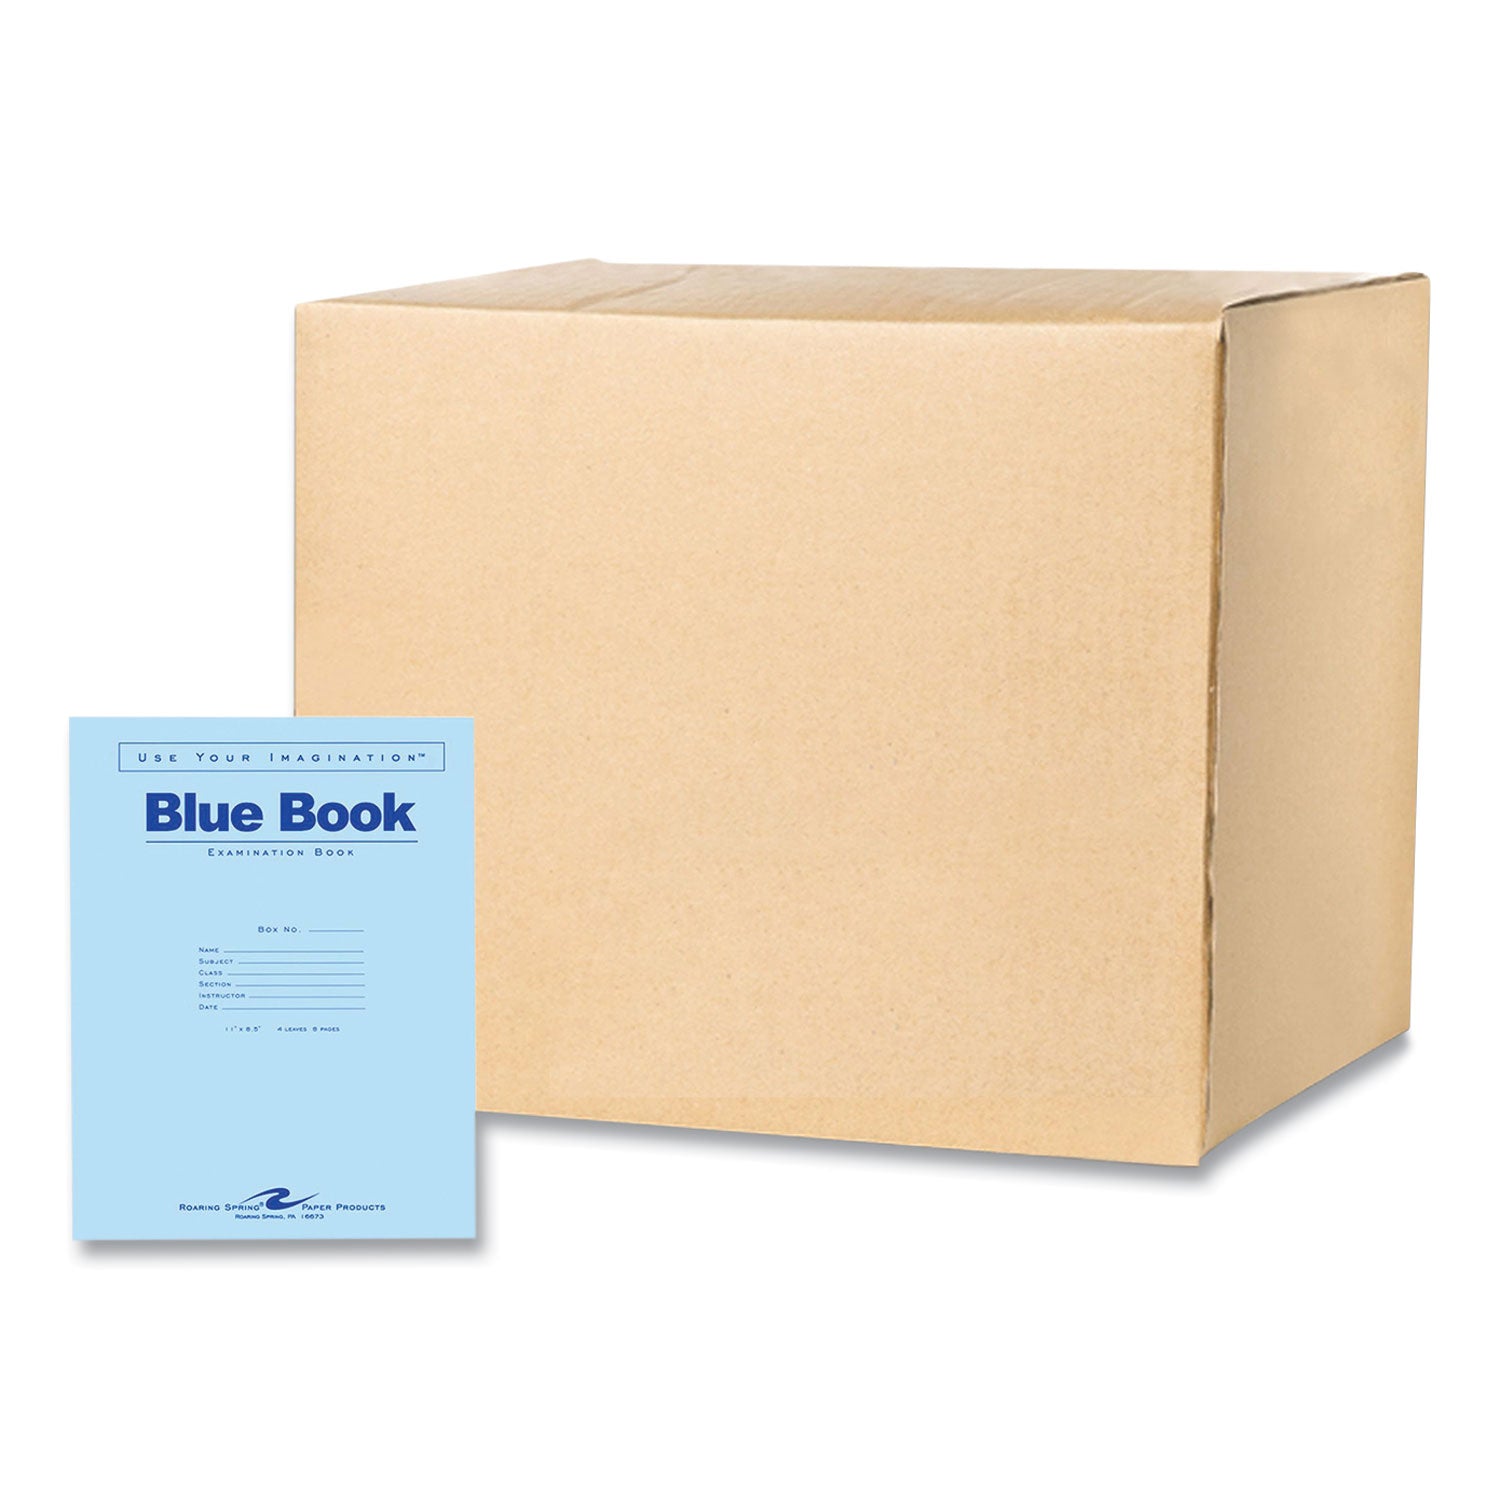 examination-blue-book-wide-legal-rule-blue-cover-4-85-x-11-sheets-600-carton-ships-in-4-6-business-days_roa77515cs - 1